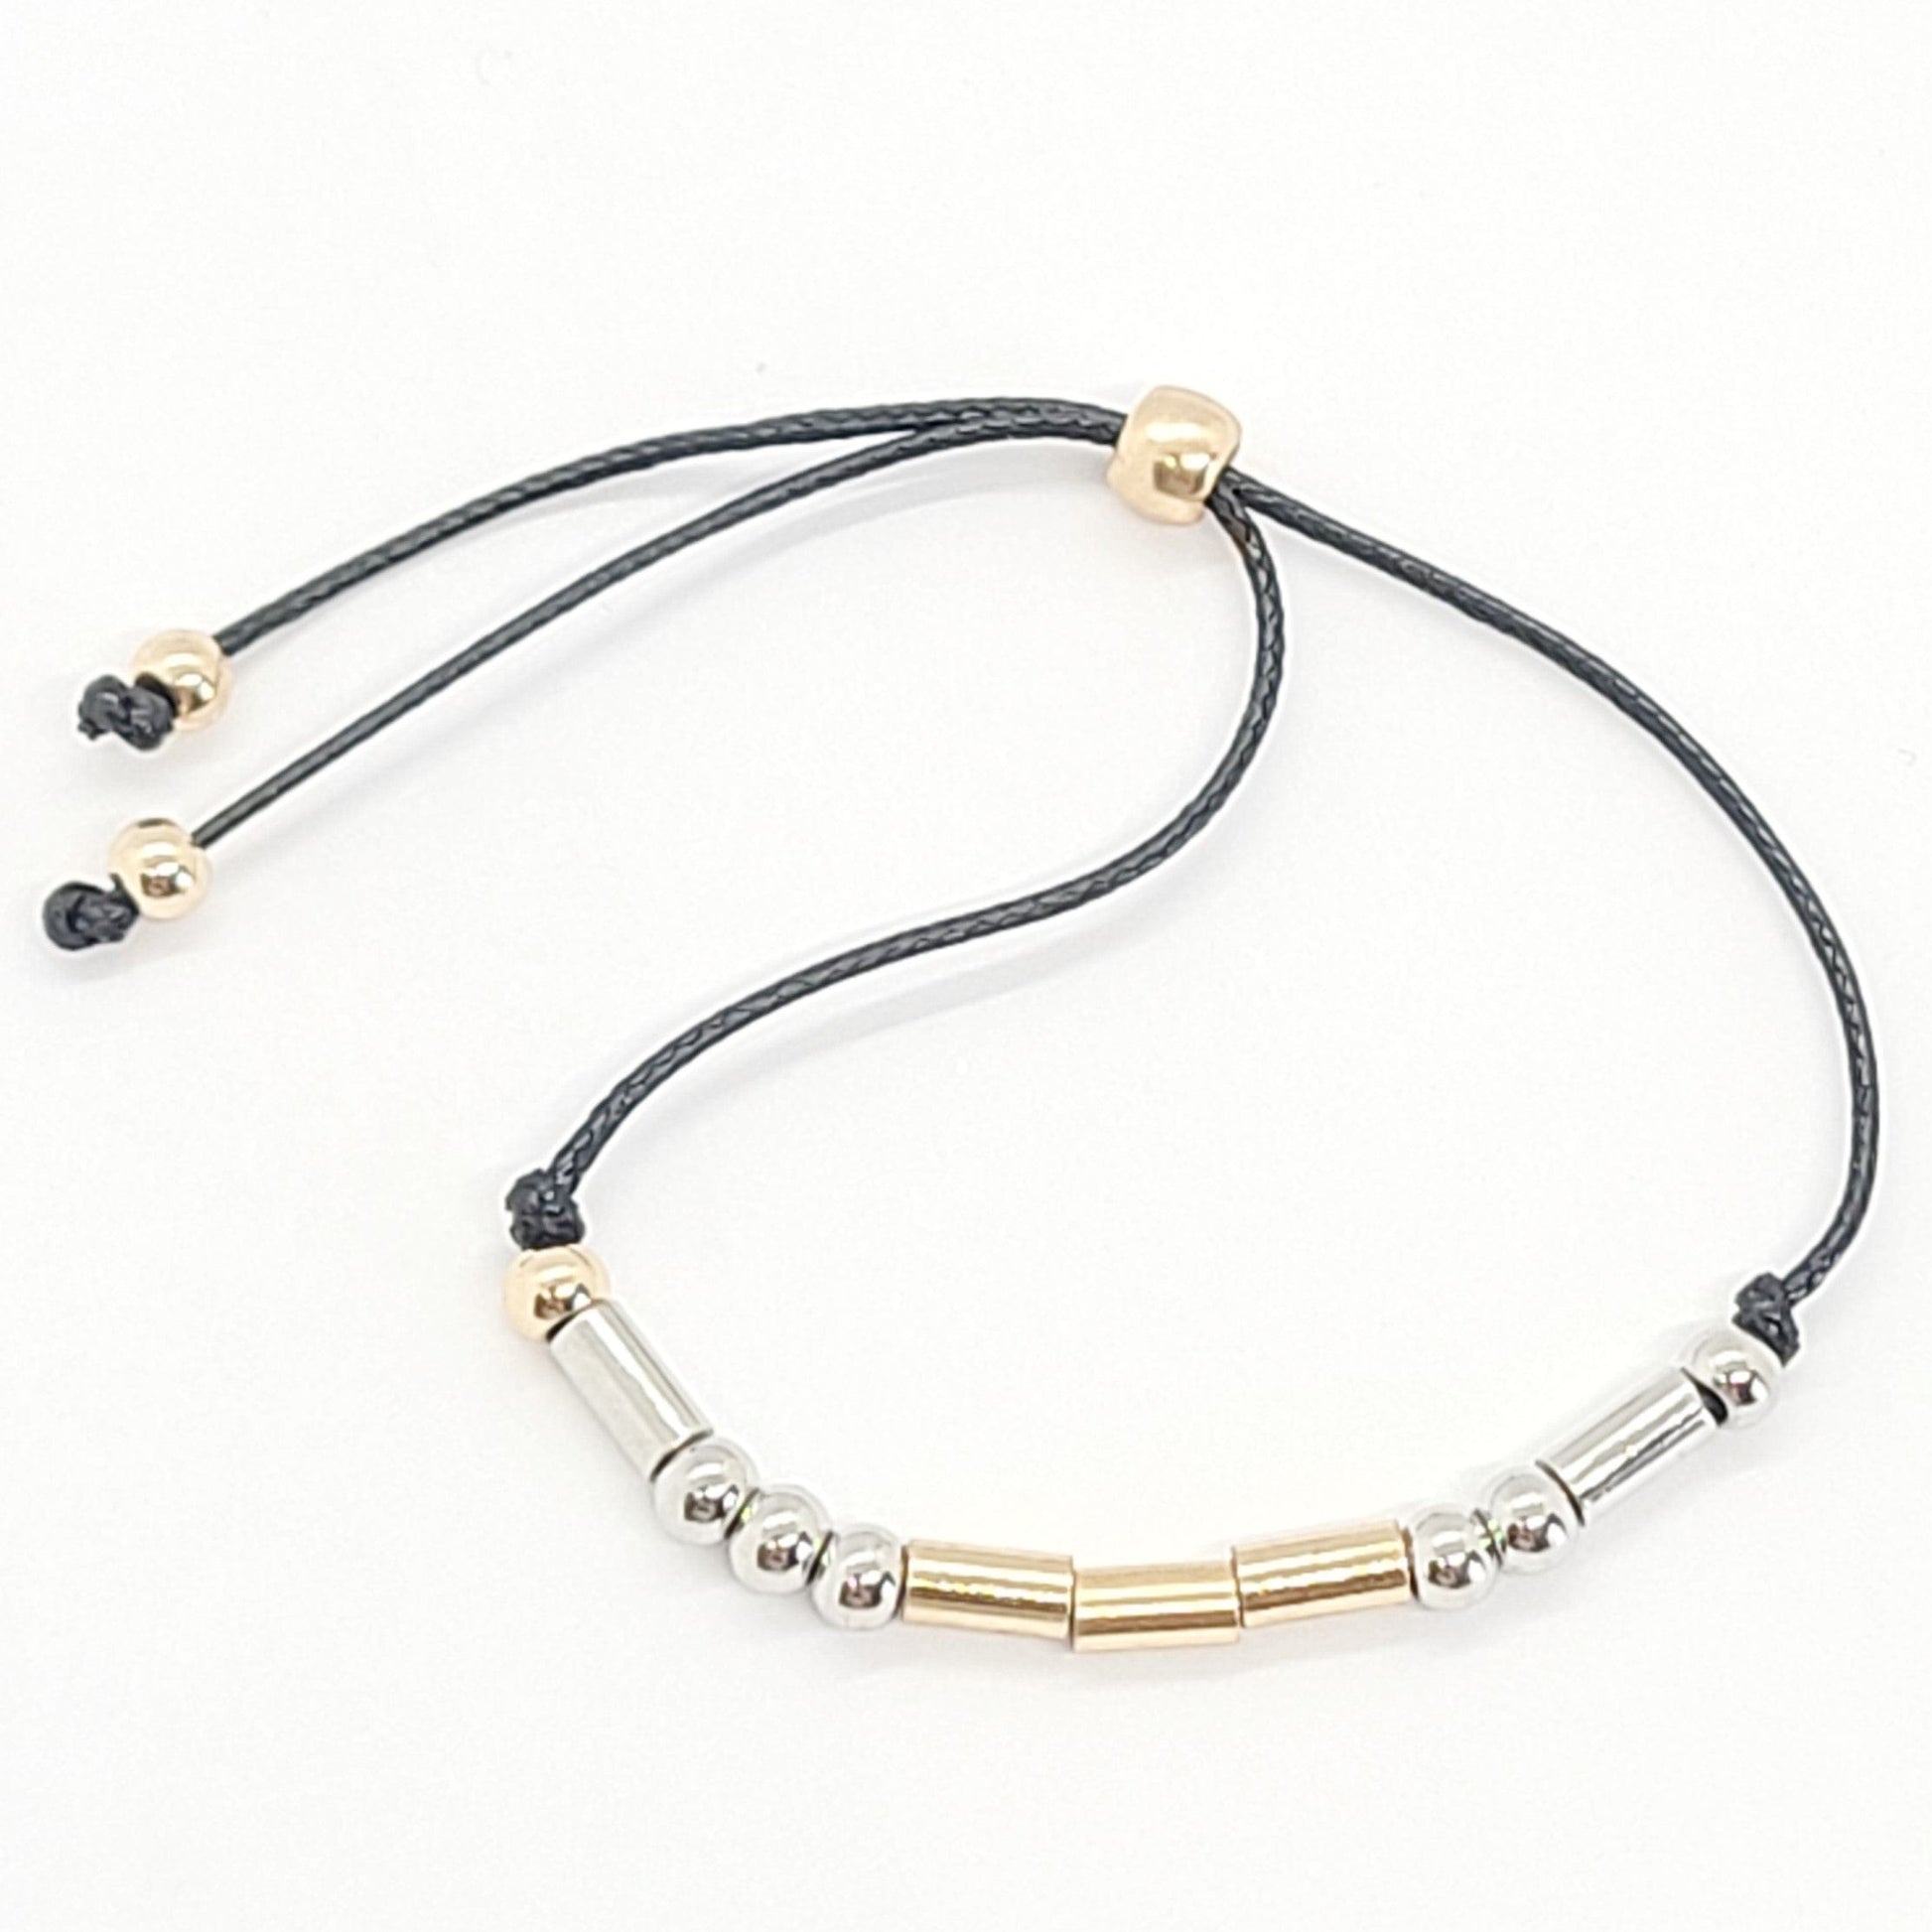 LOVE Morse Code Bracelet By Recovery Matters